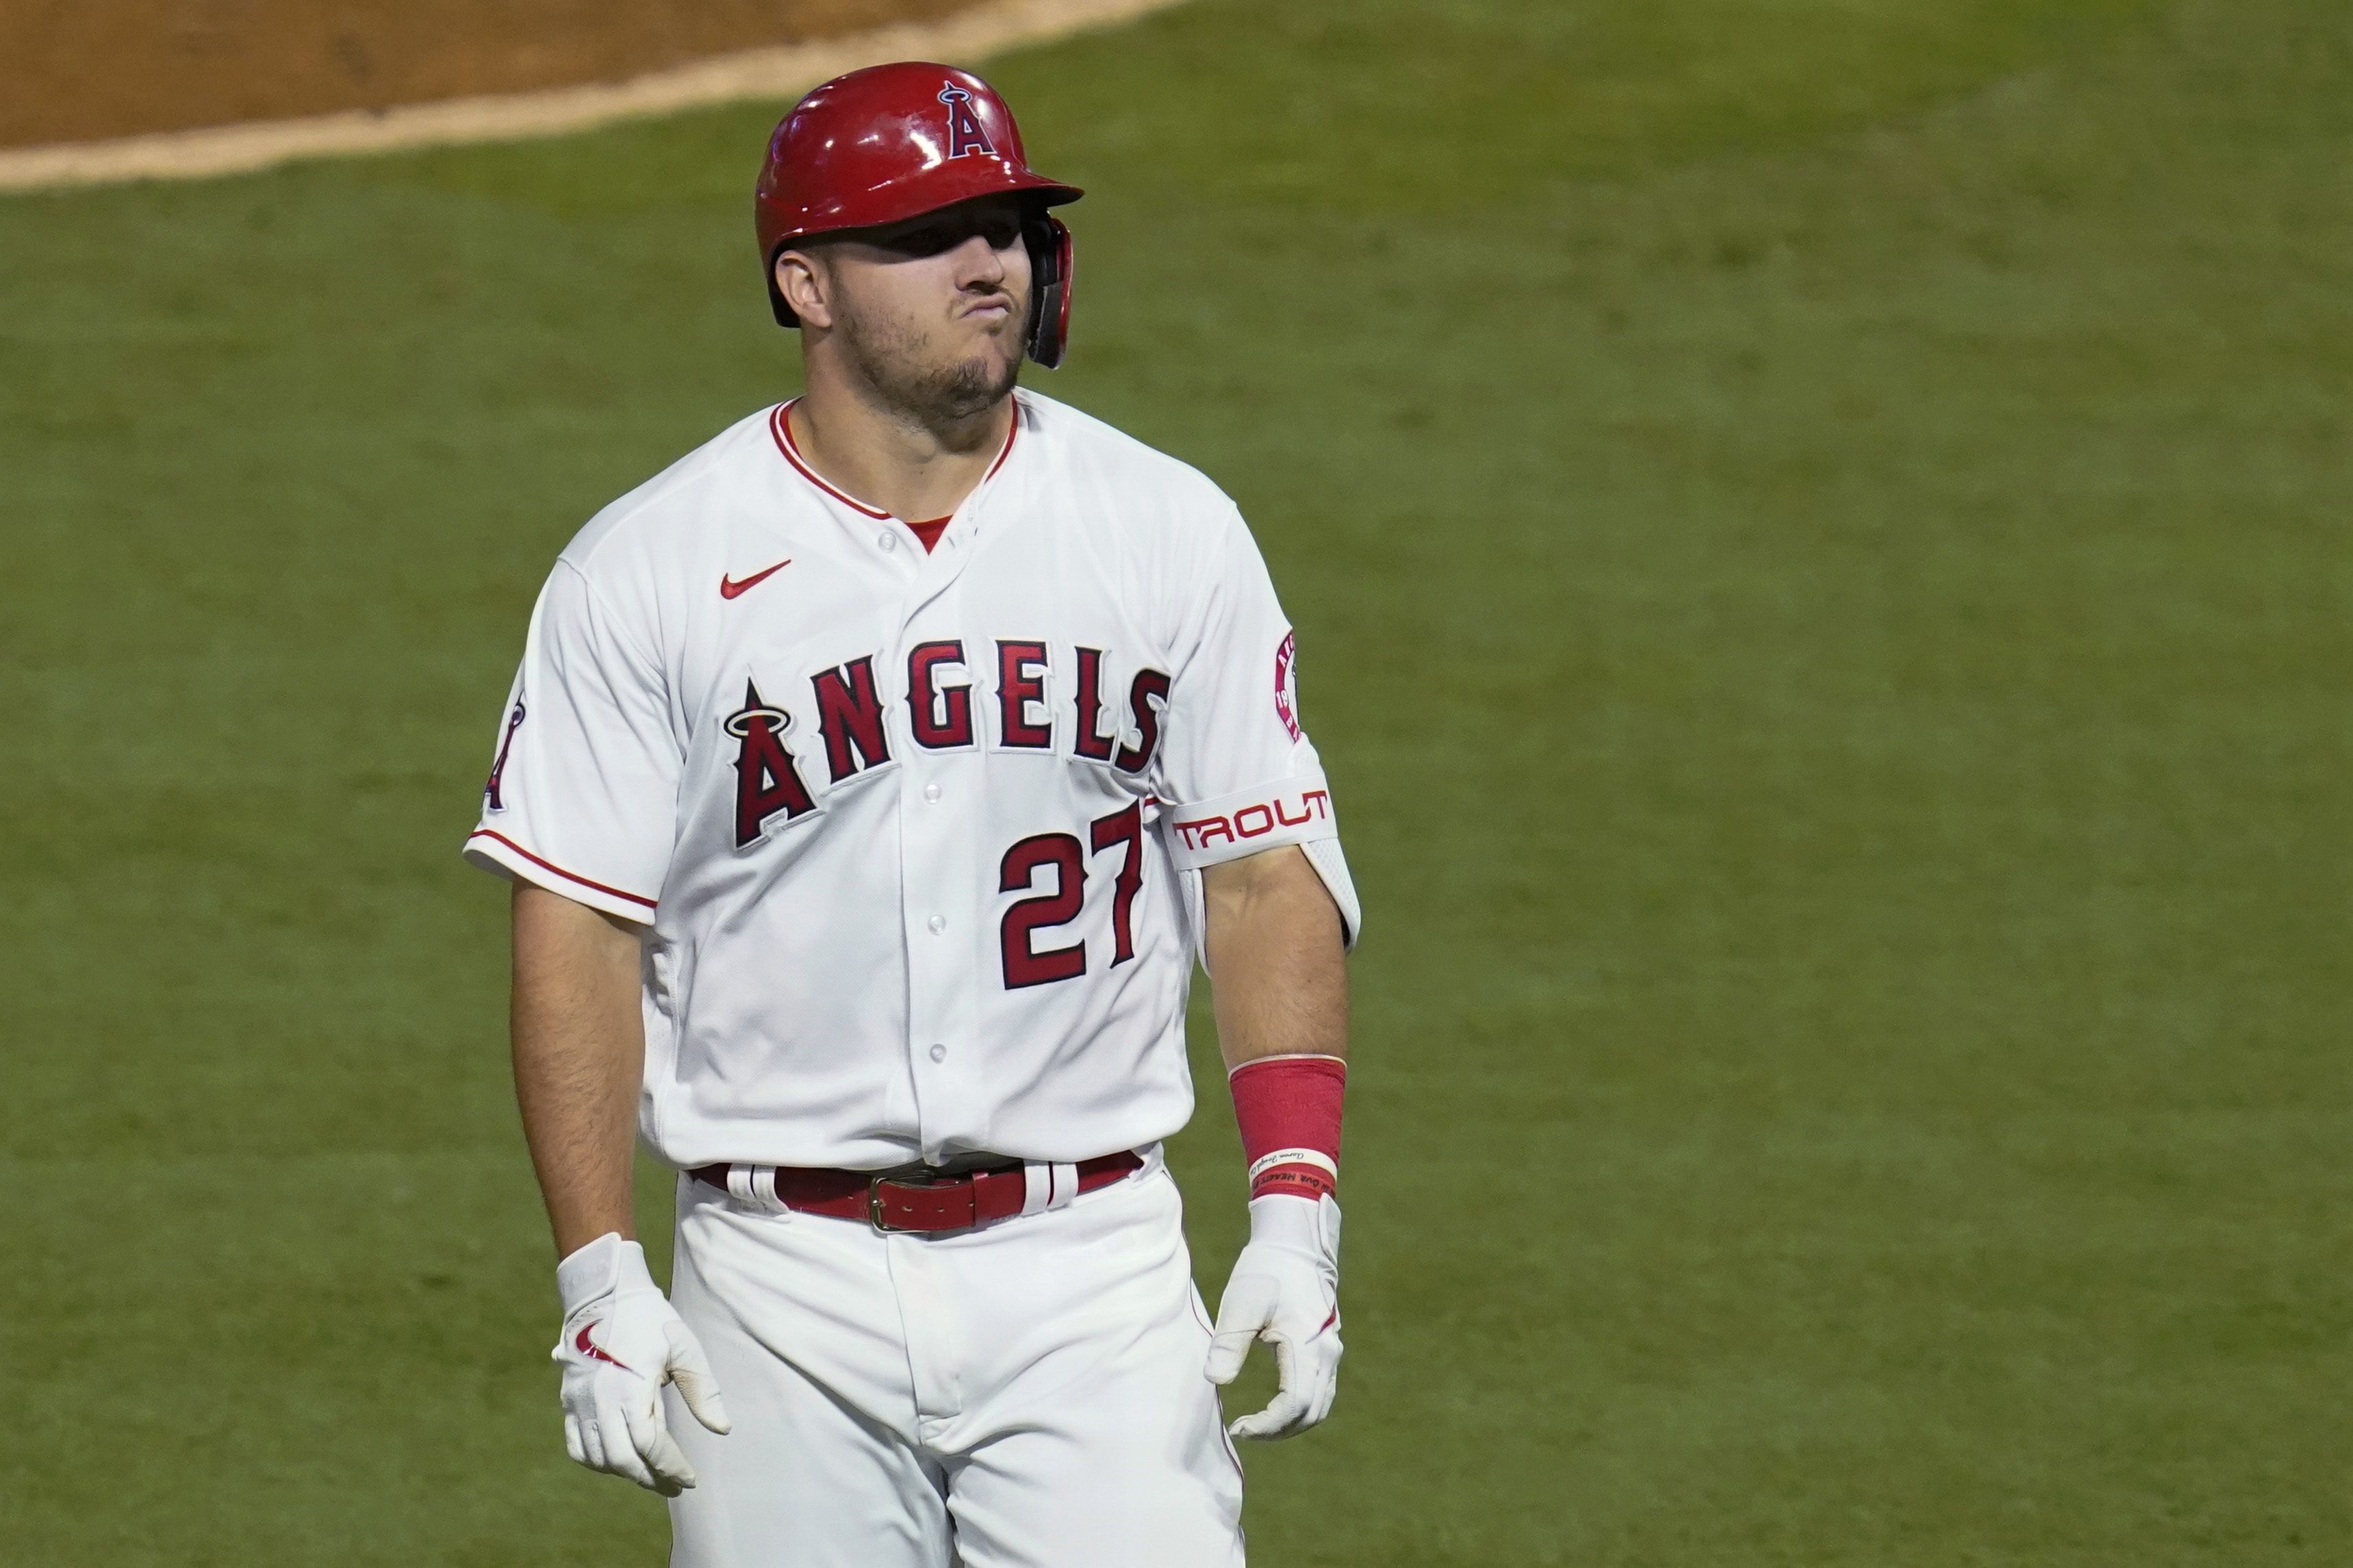 Where Did Mike Trout Go to College?